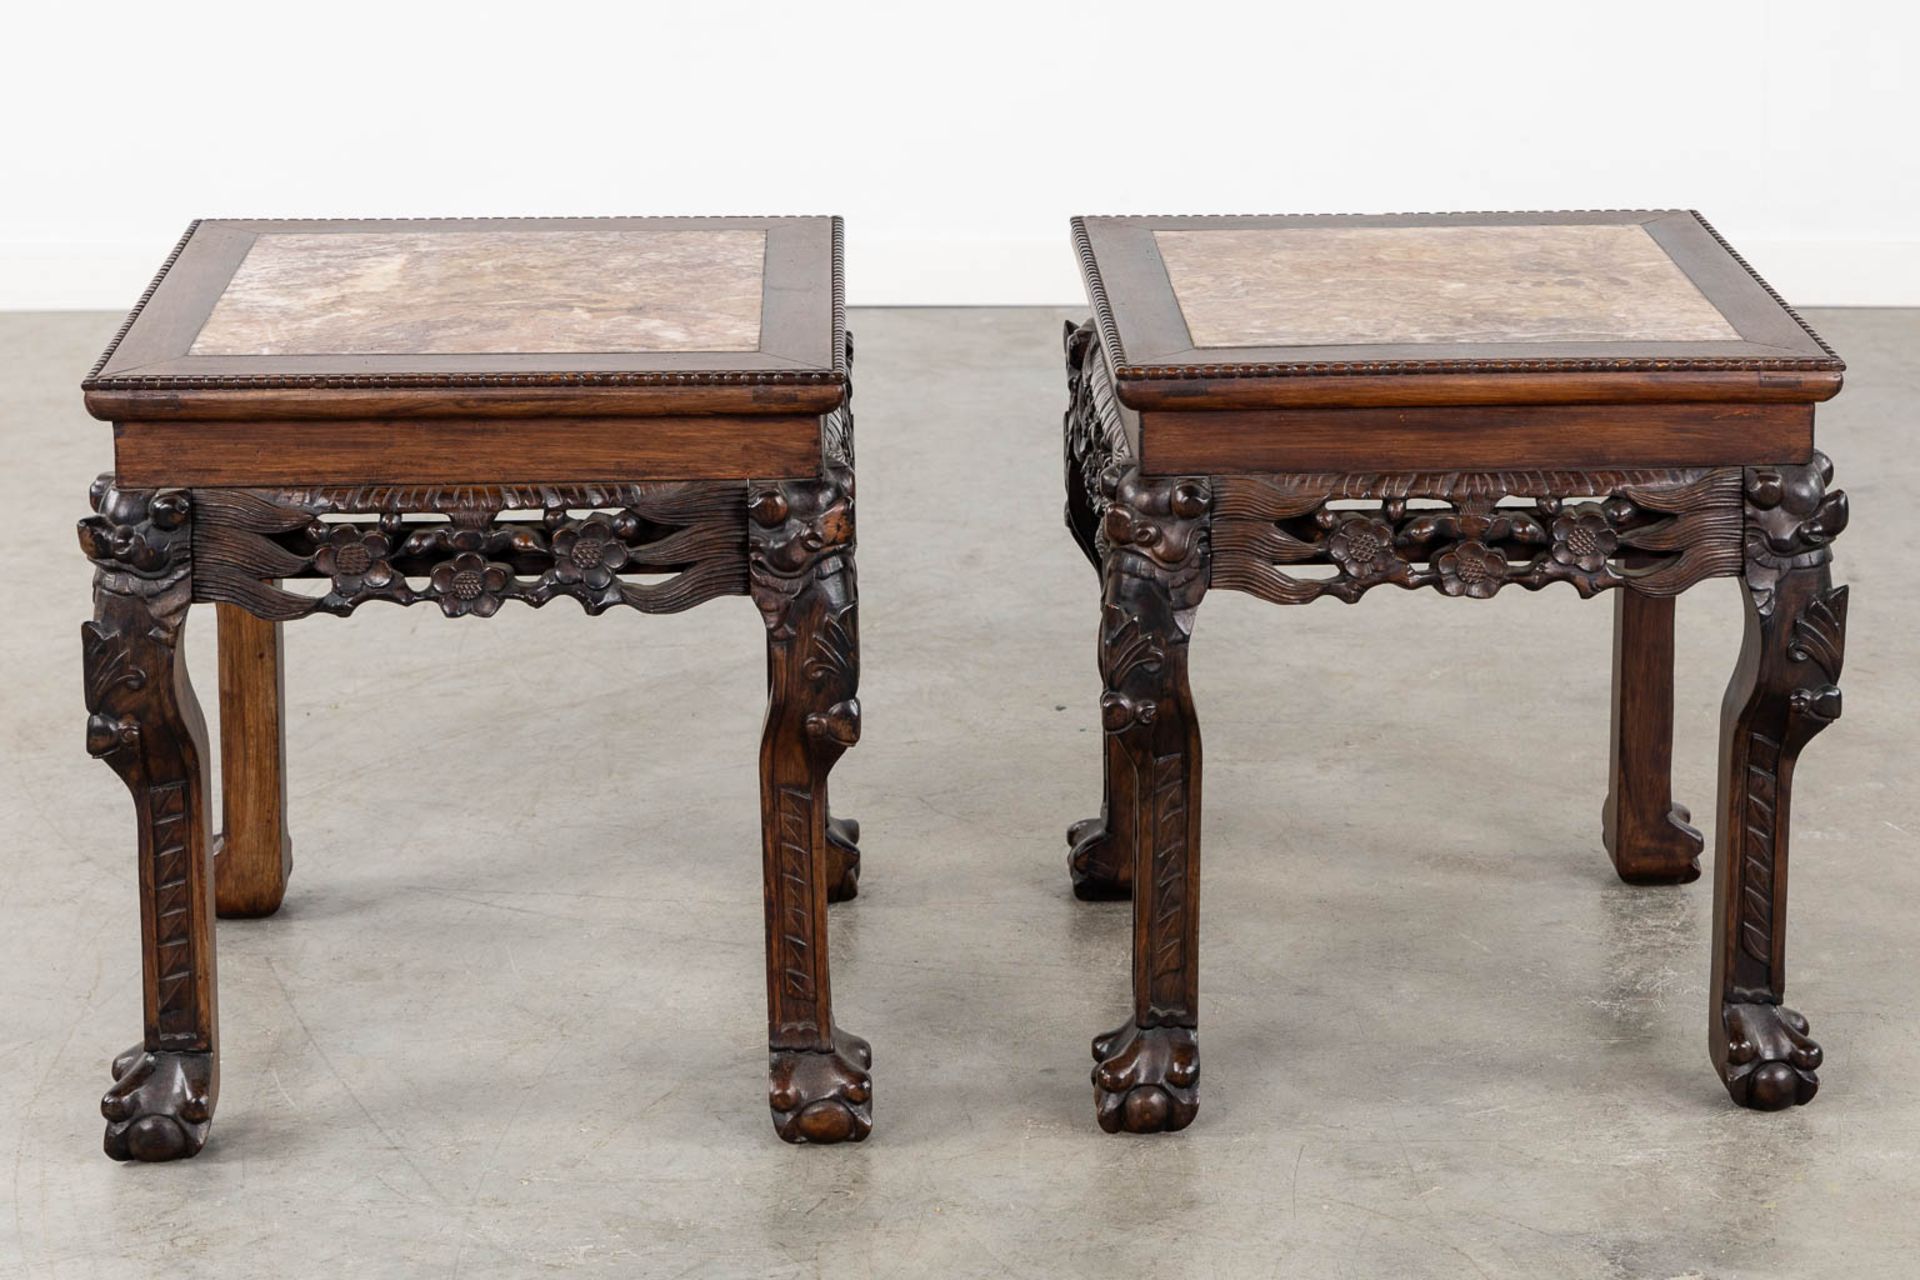 A pair of square Chinese side tables, hardwood with a marble top. (L:44 x W:44 x H:46 cm) - Bild 5 aus 11